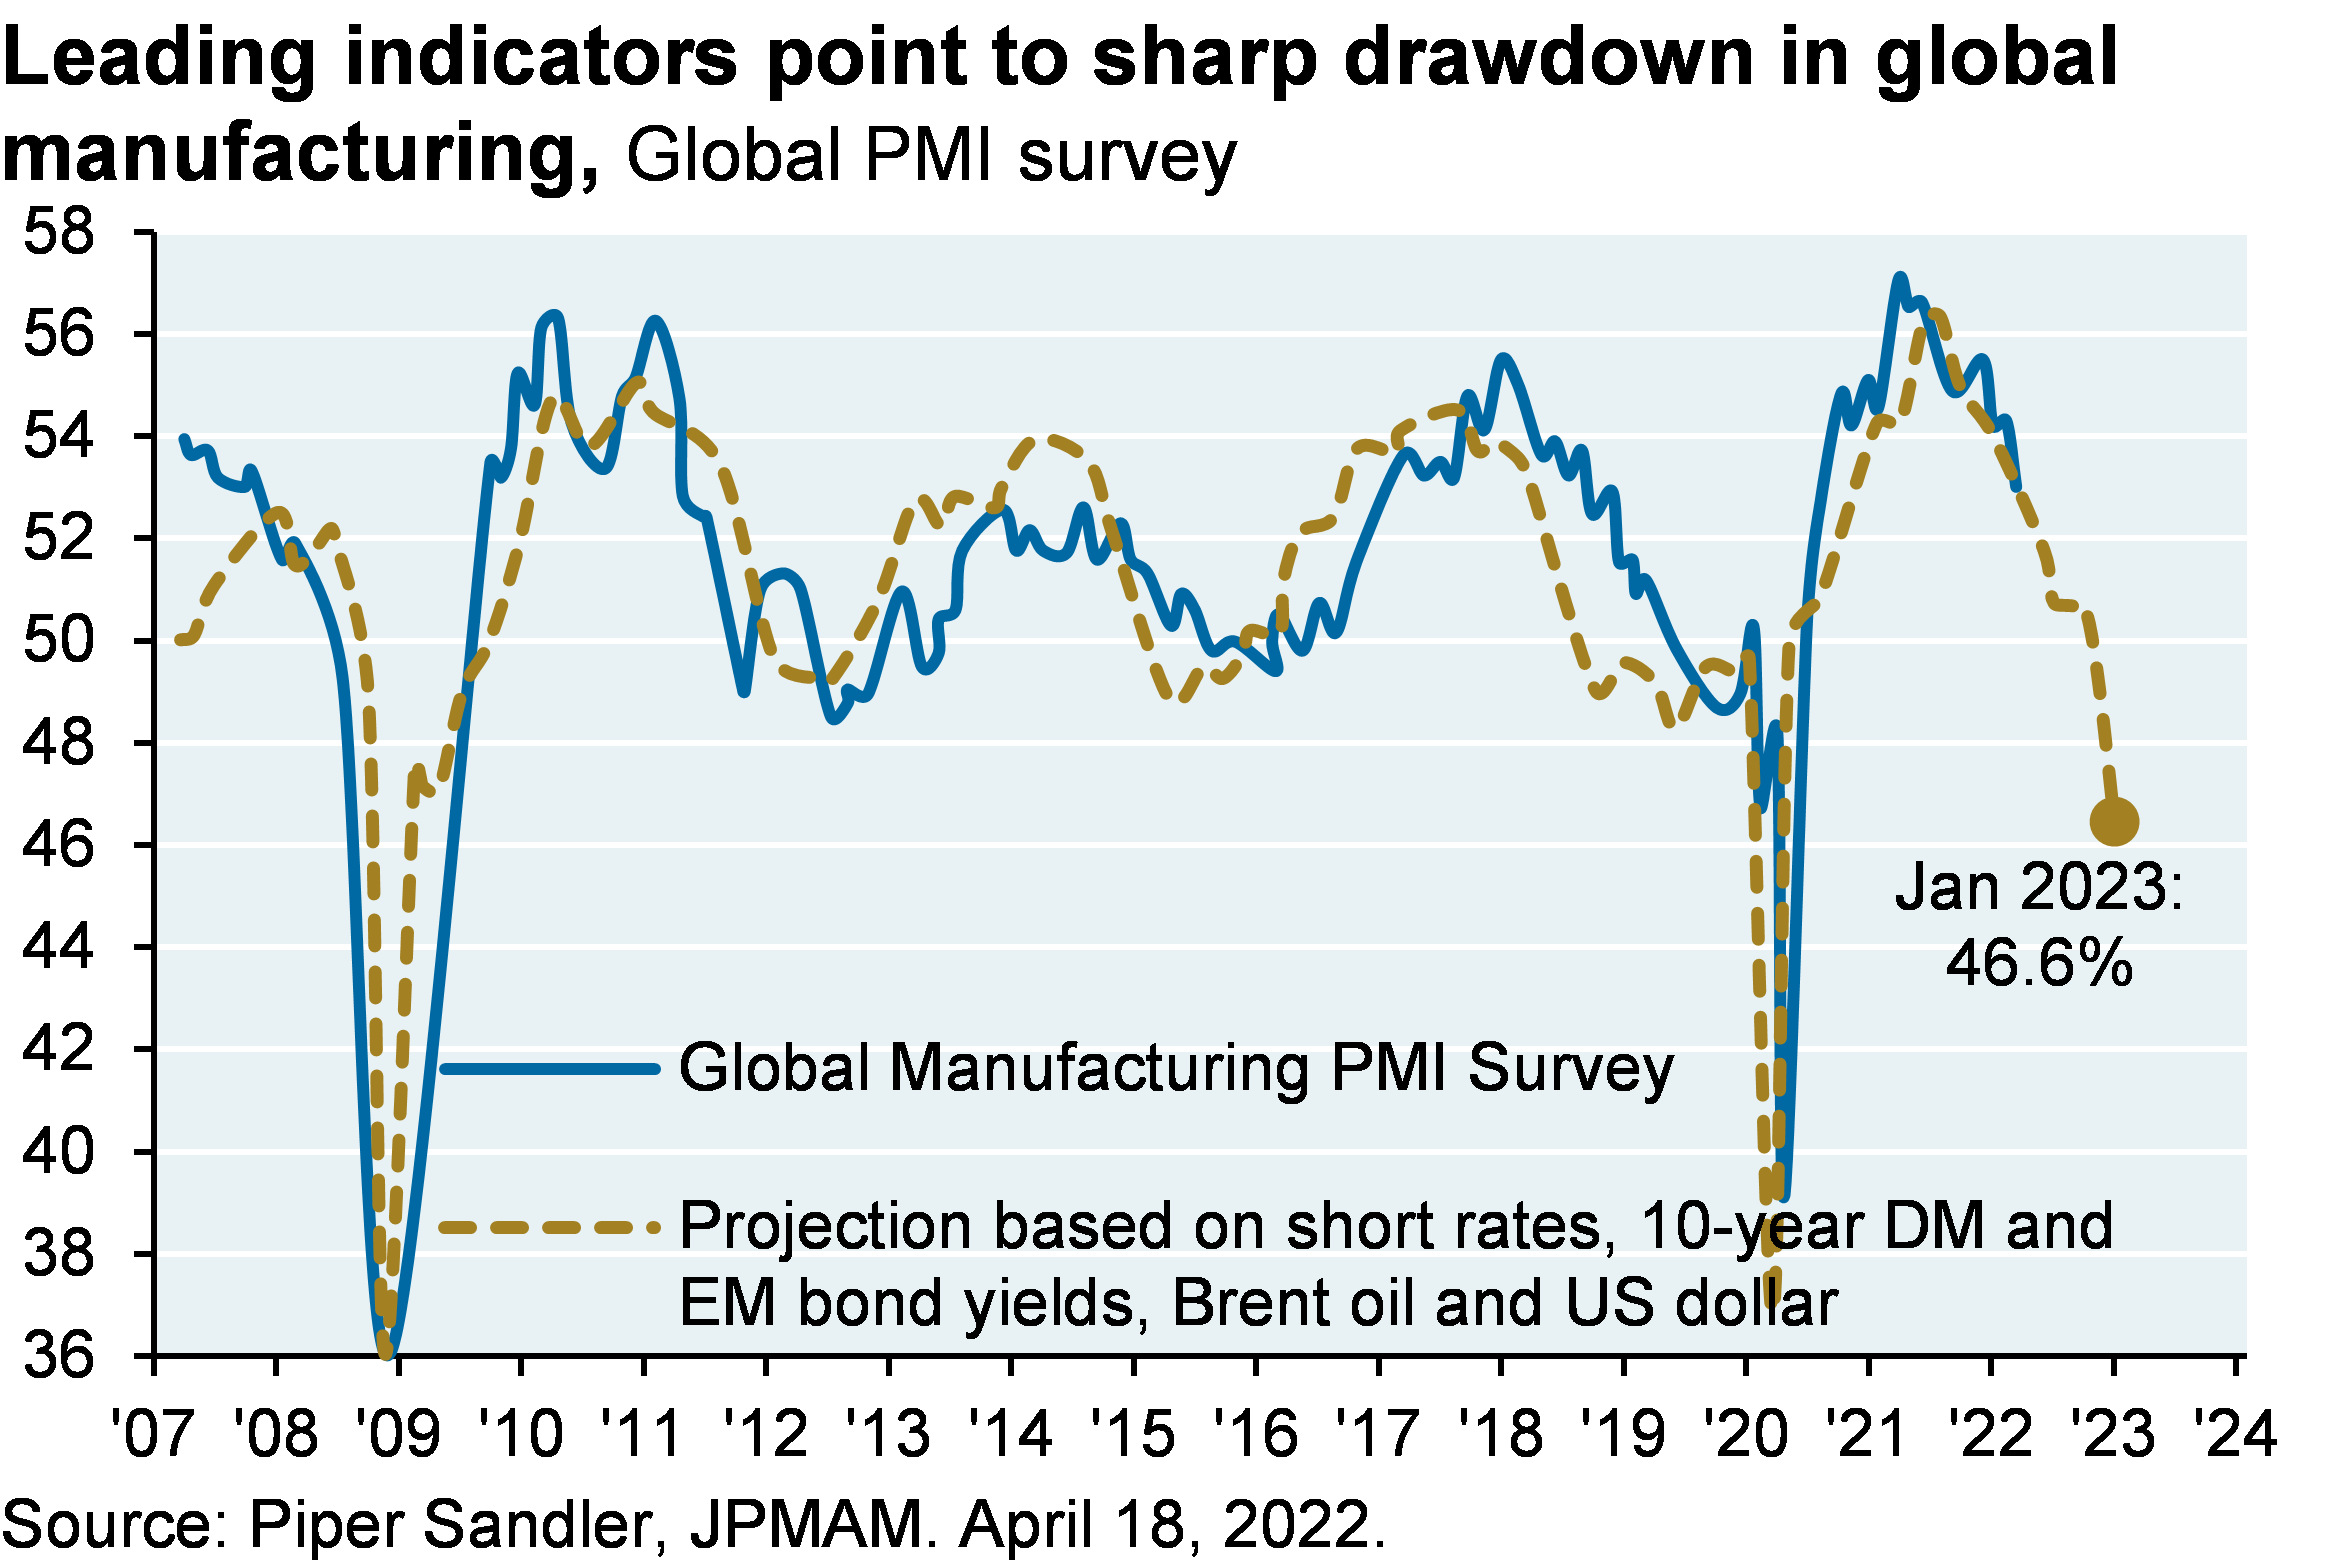 Leading indicators point to sharp drawdown in global manufacturing